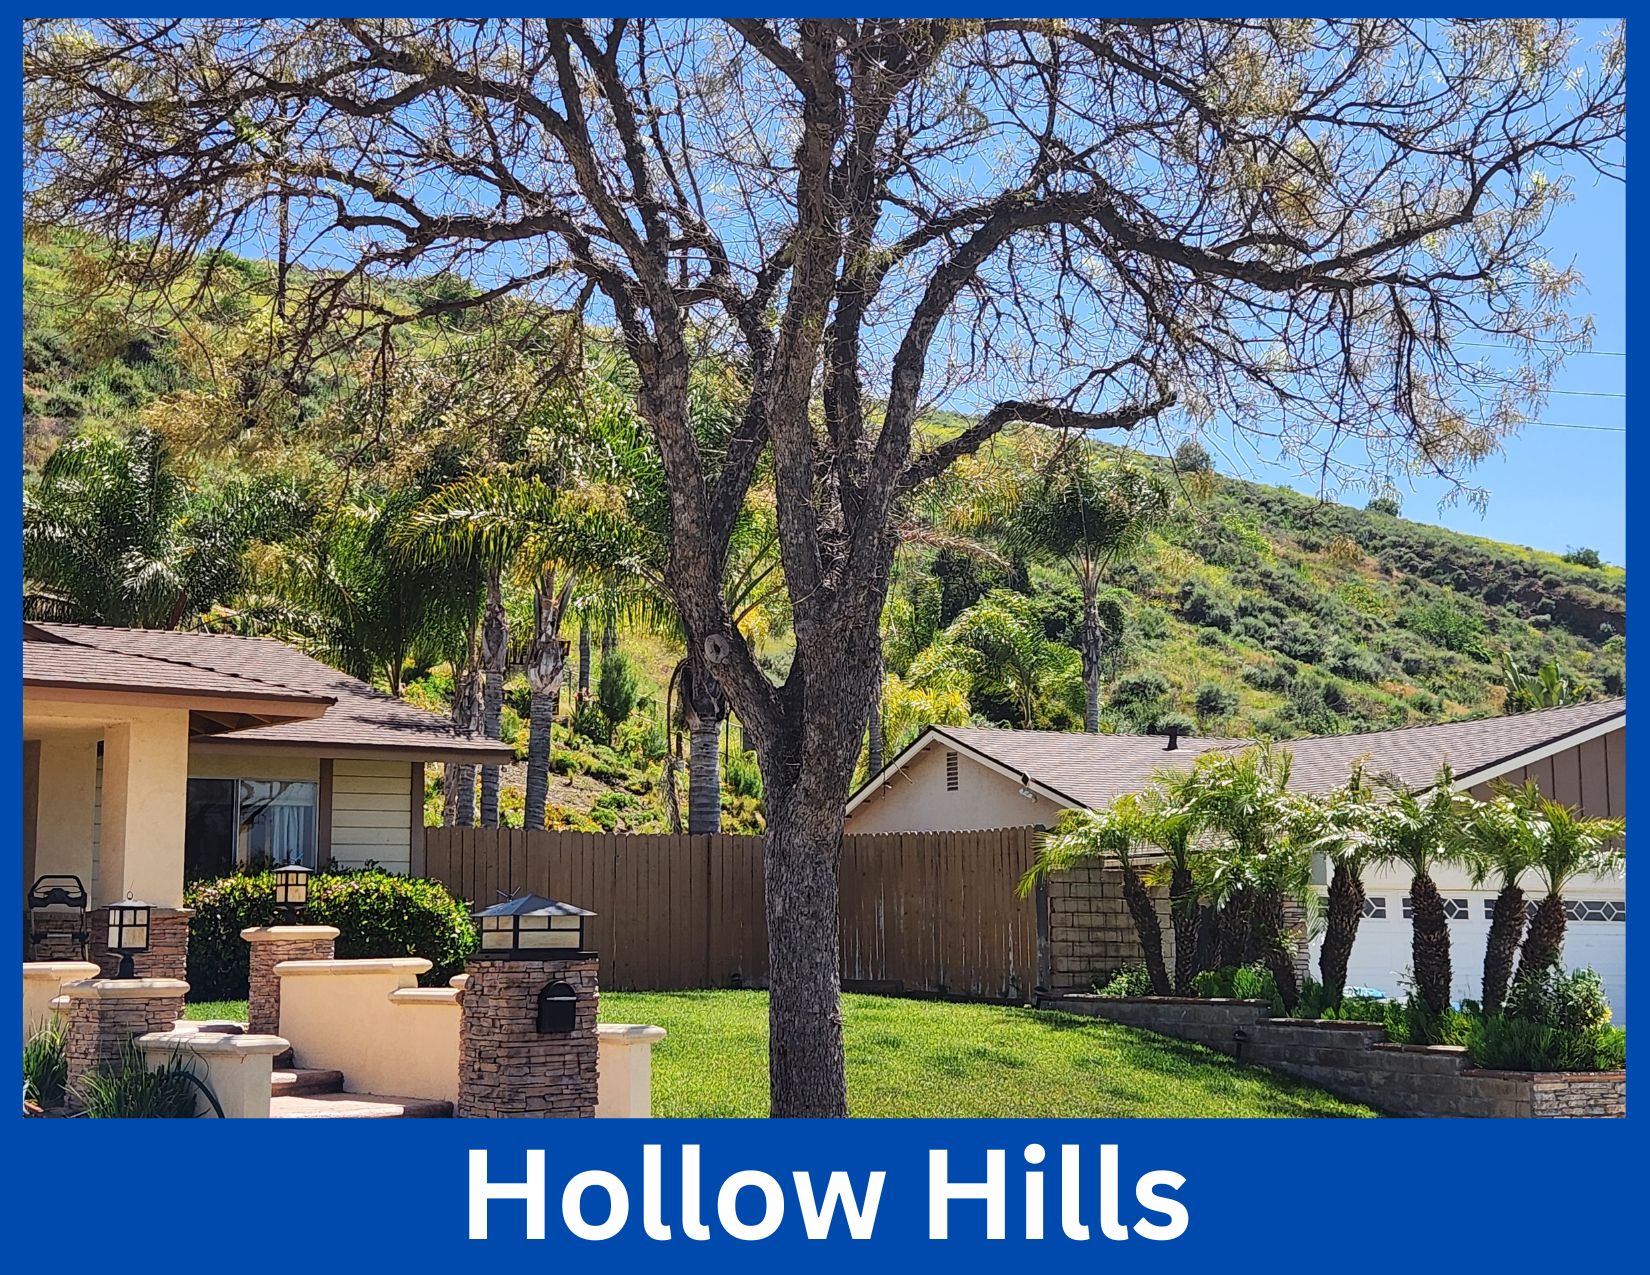 Hollow Hills, Simi Valley